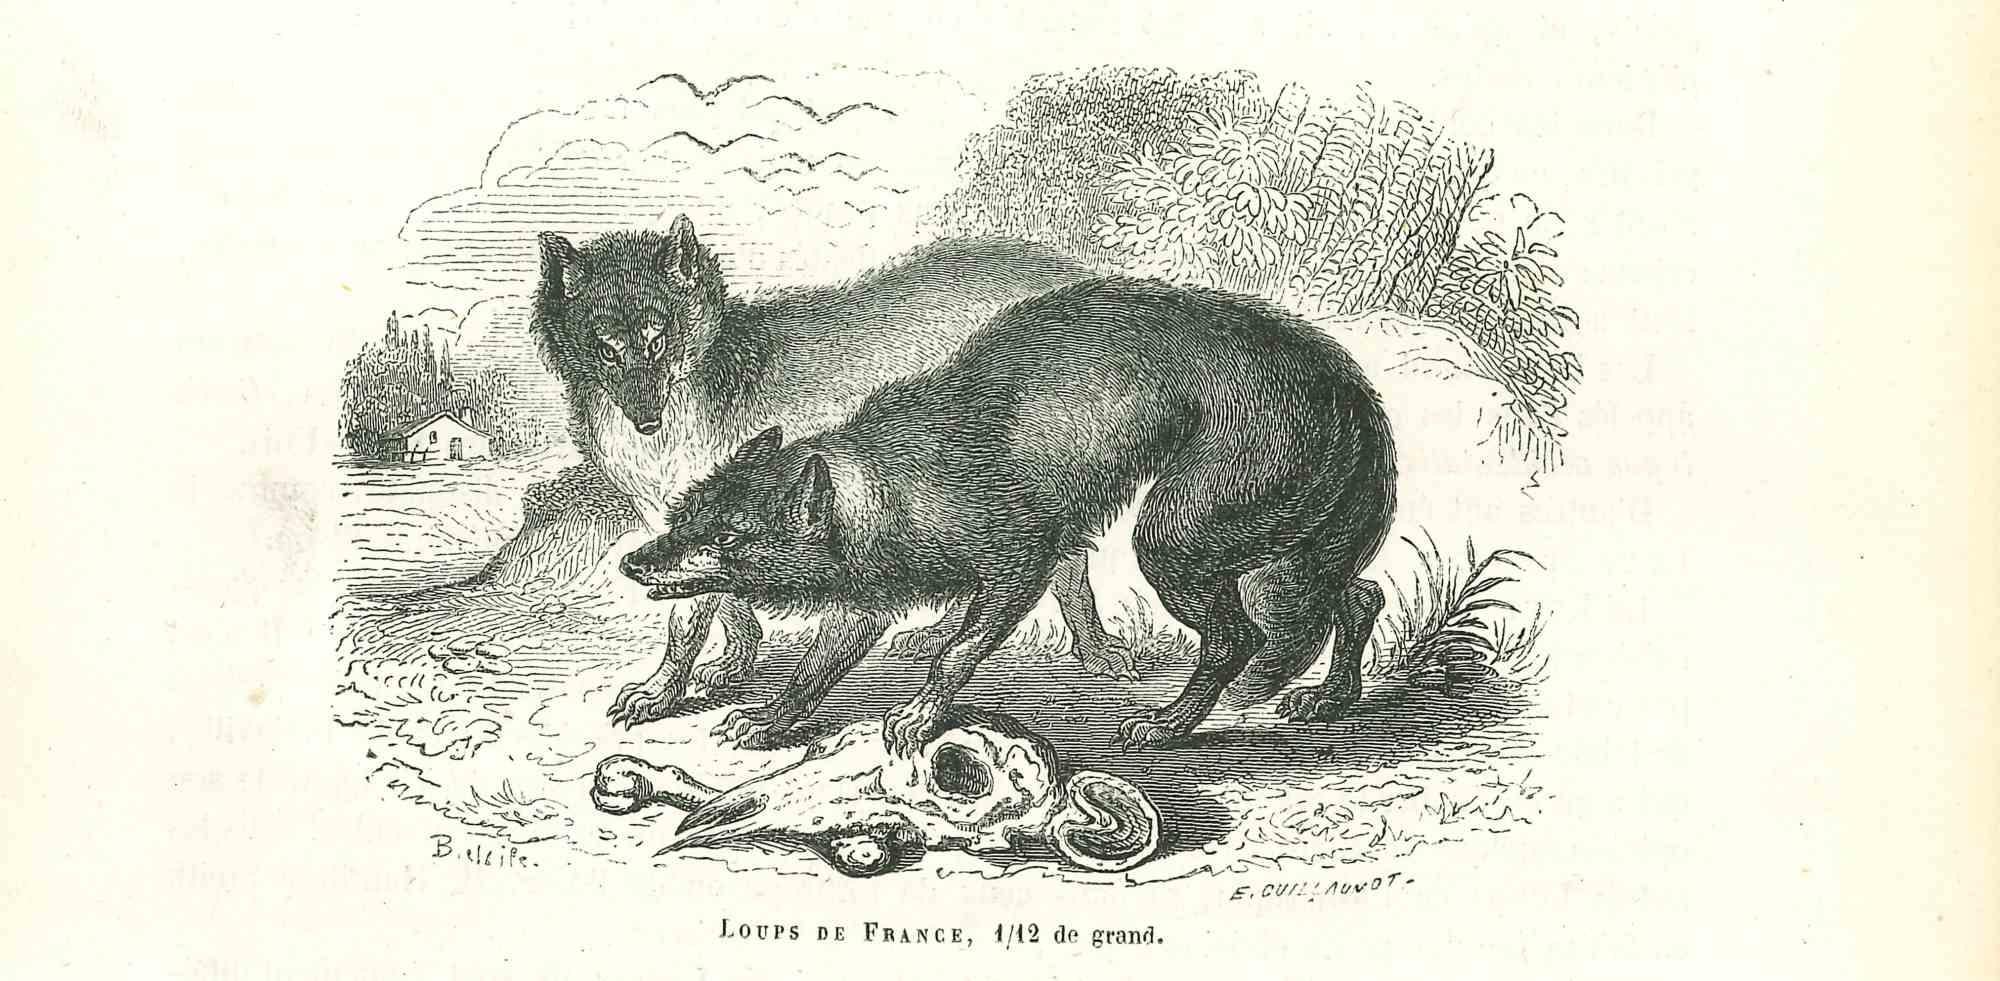 The Wolves is an original lithograph on ivory-colored paper, realized by Paul Gervais (1816-1879). The artwork is from The Series of "Les Trois Règnes de la Nature", and was published in 1854.

Good conditions.

Titled on the lower. With the notes